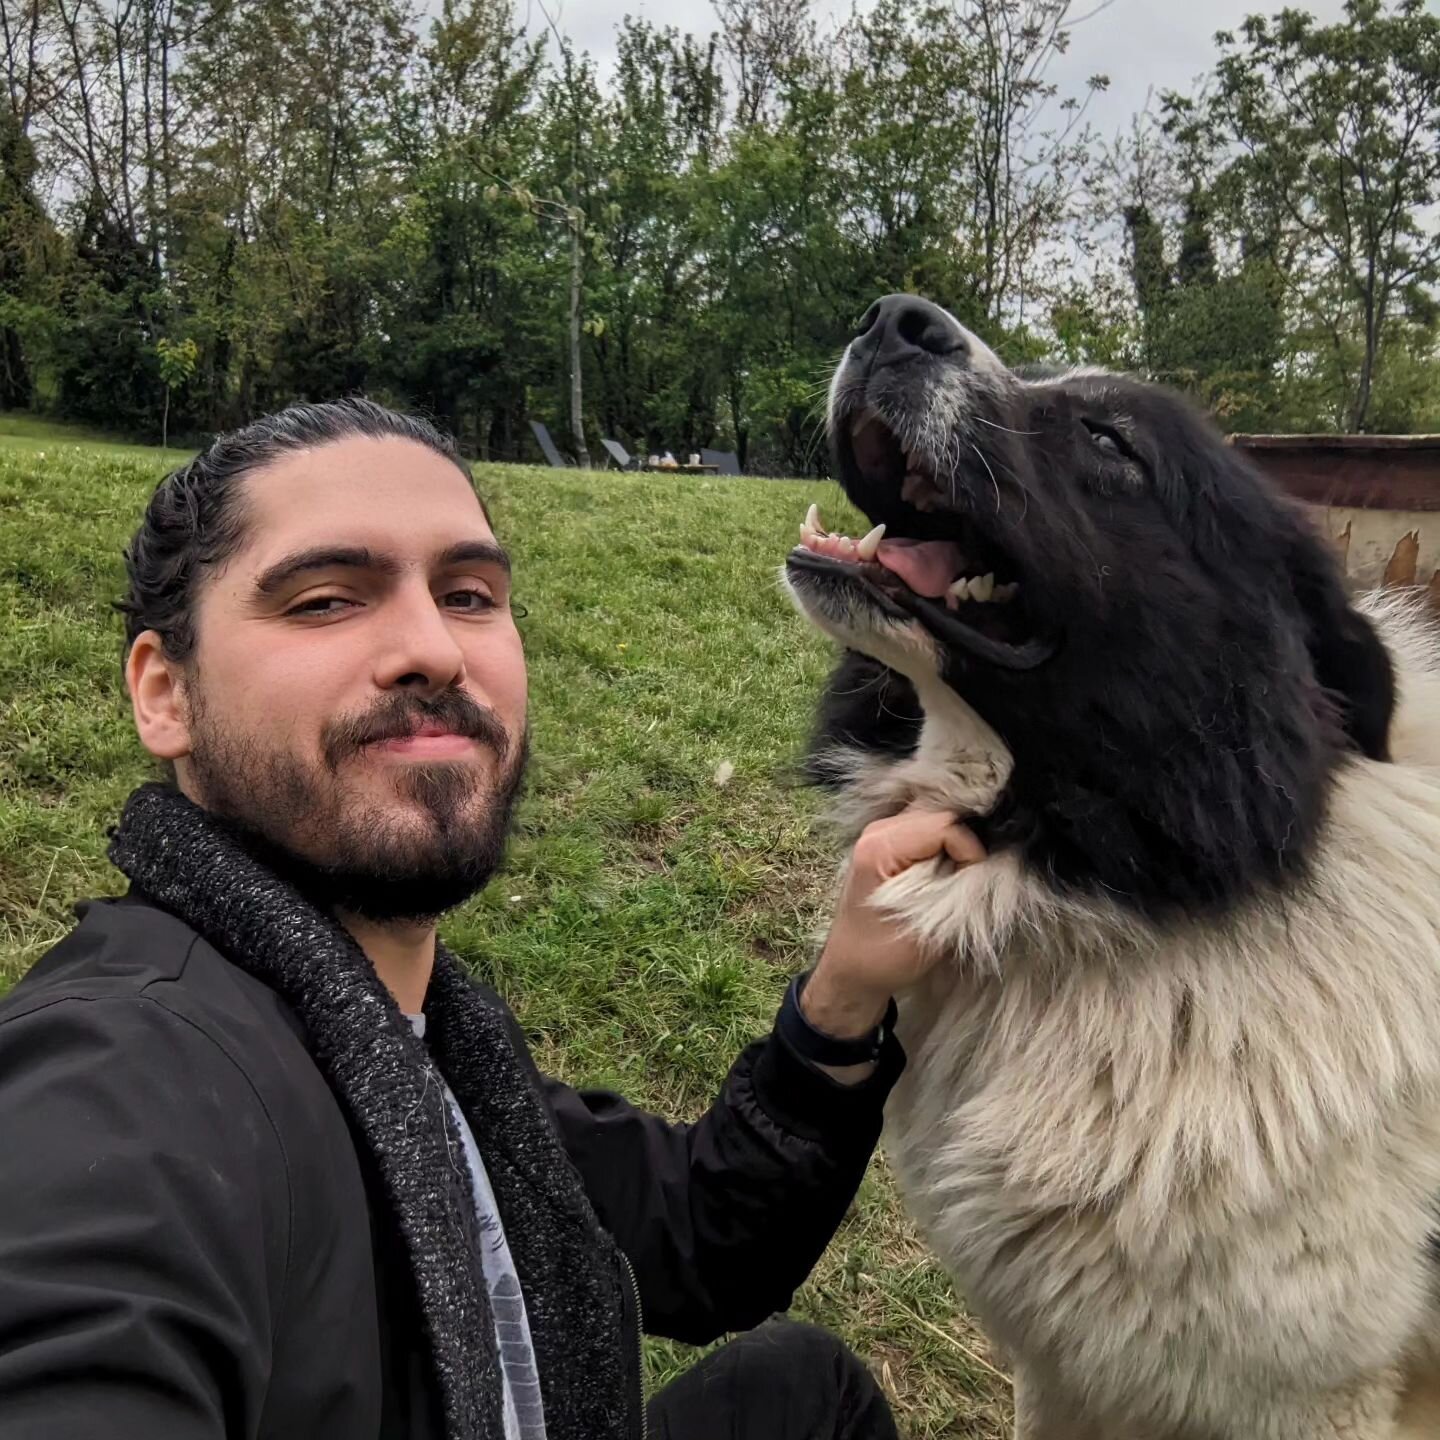 We met the king of the sheep dogs: Zarik the Karakachan.
He's an absolute beast, and I'm exhausted after a few days of play-fighting and a walk through his kingdom with @potomka_ - worth it though!